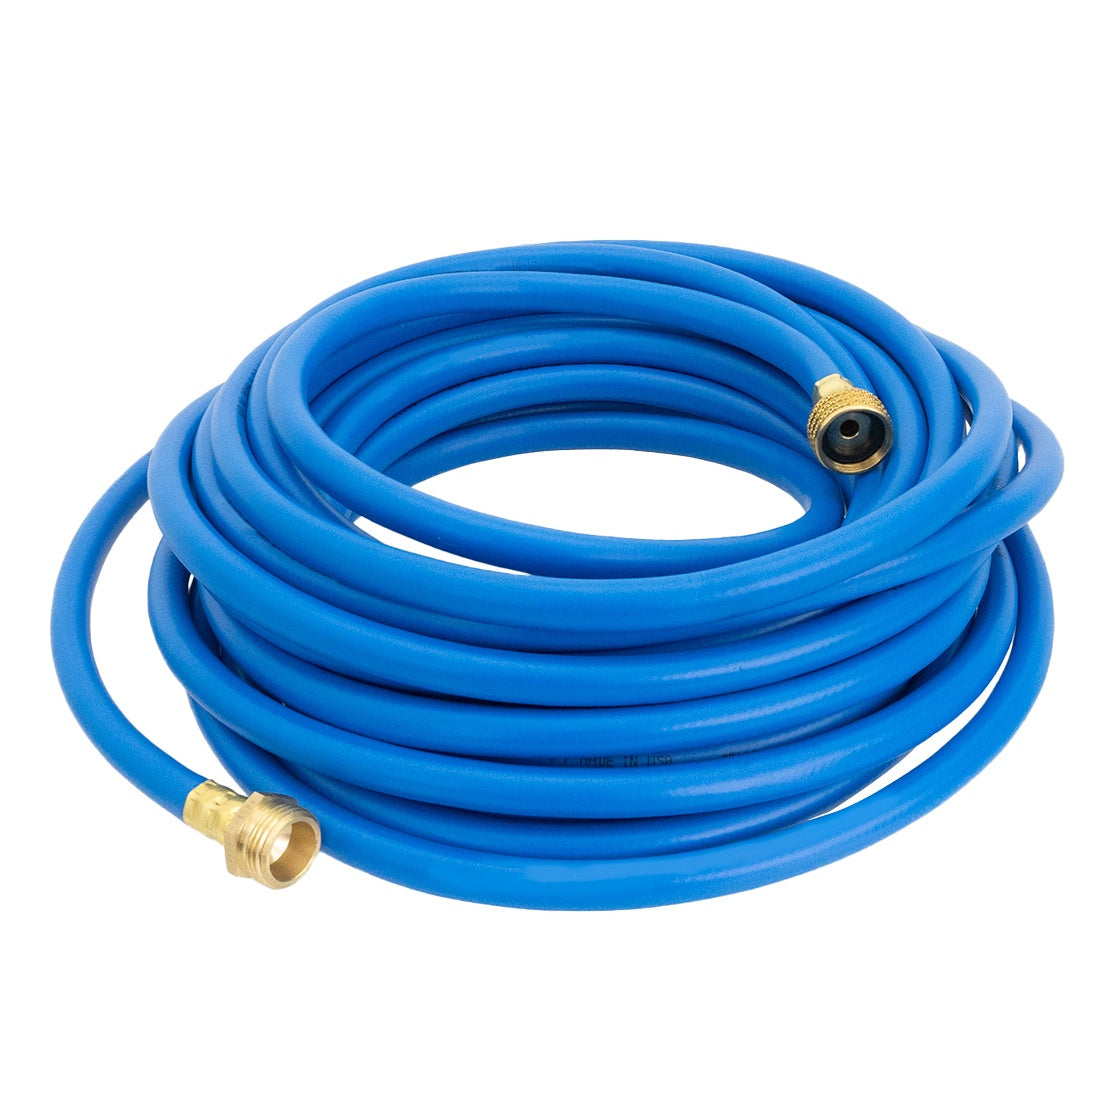 XERO Rubber Hose - 3/8 Inch Blue Front View